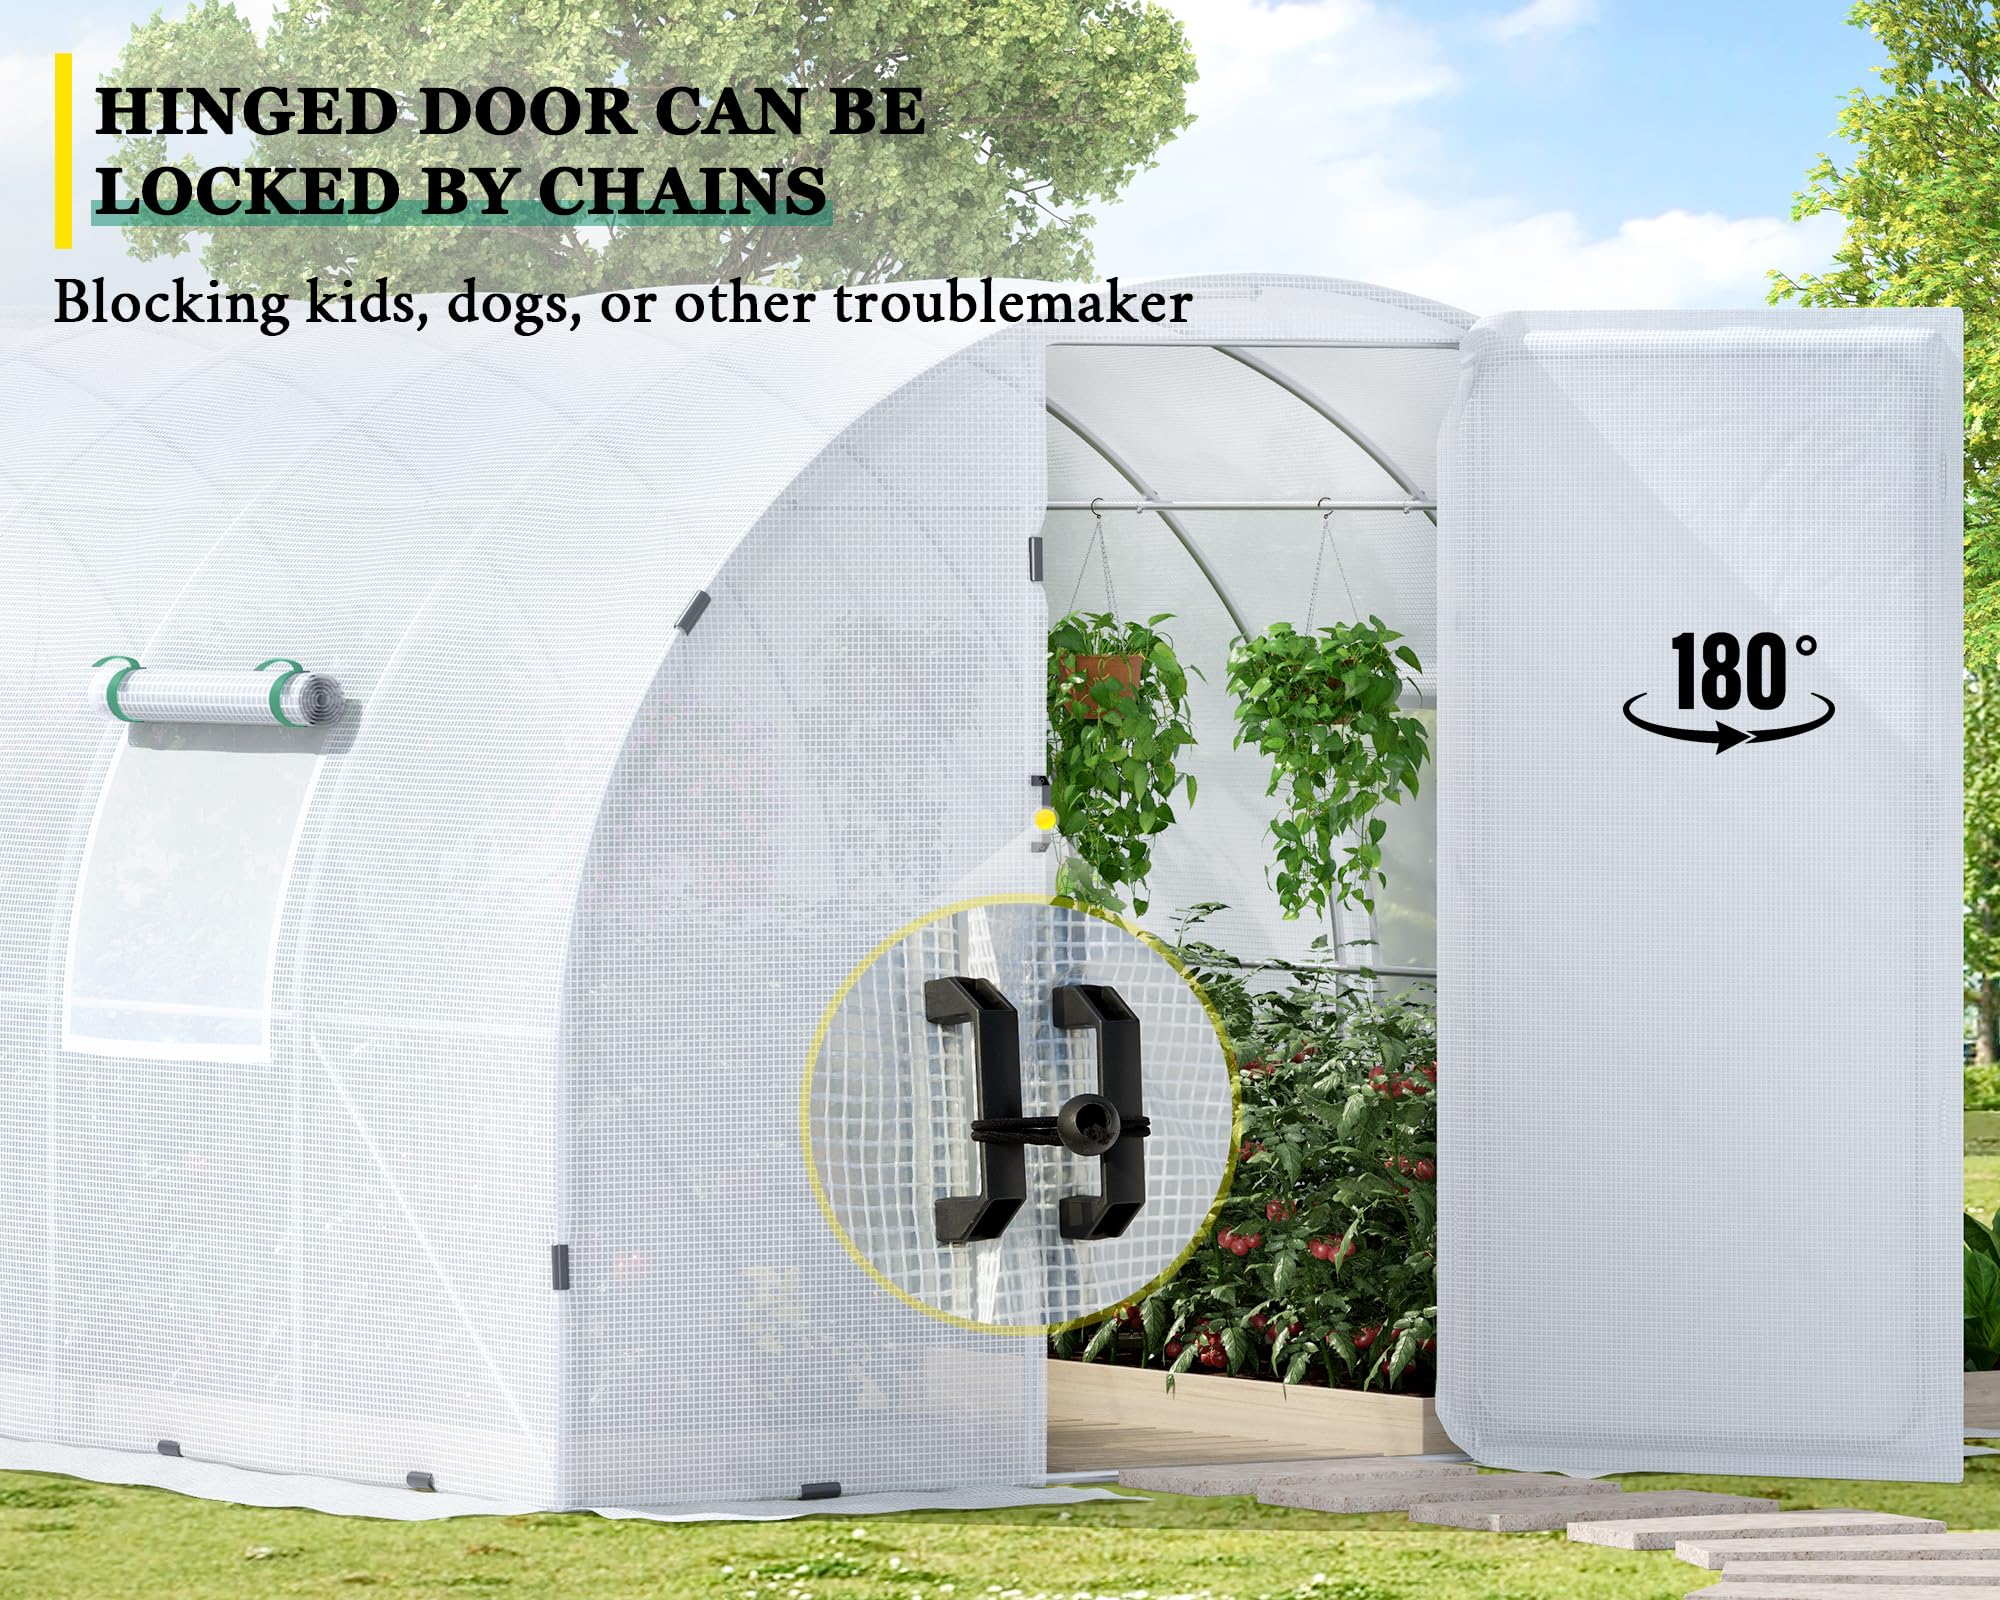 Papababe 20x10x7.5 FT Extra high Large Walk-in Greenhouse for Outdoors, Upgraded Swing Door, Heavy Duty Galvanized Steel Frame Tunnel Greenhouse kit, Reinforced PE Cover & Film Clips, White